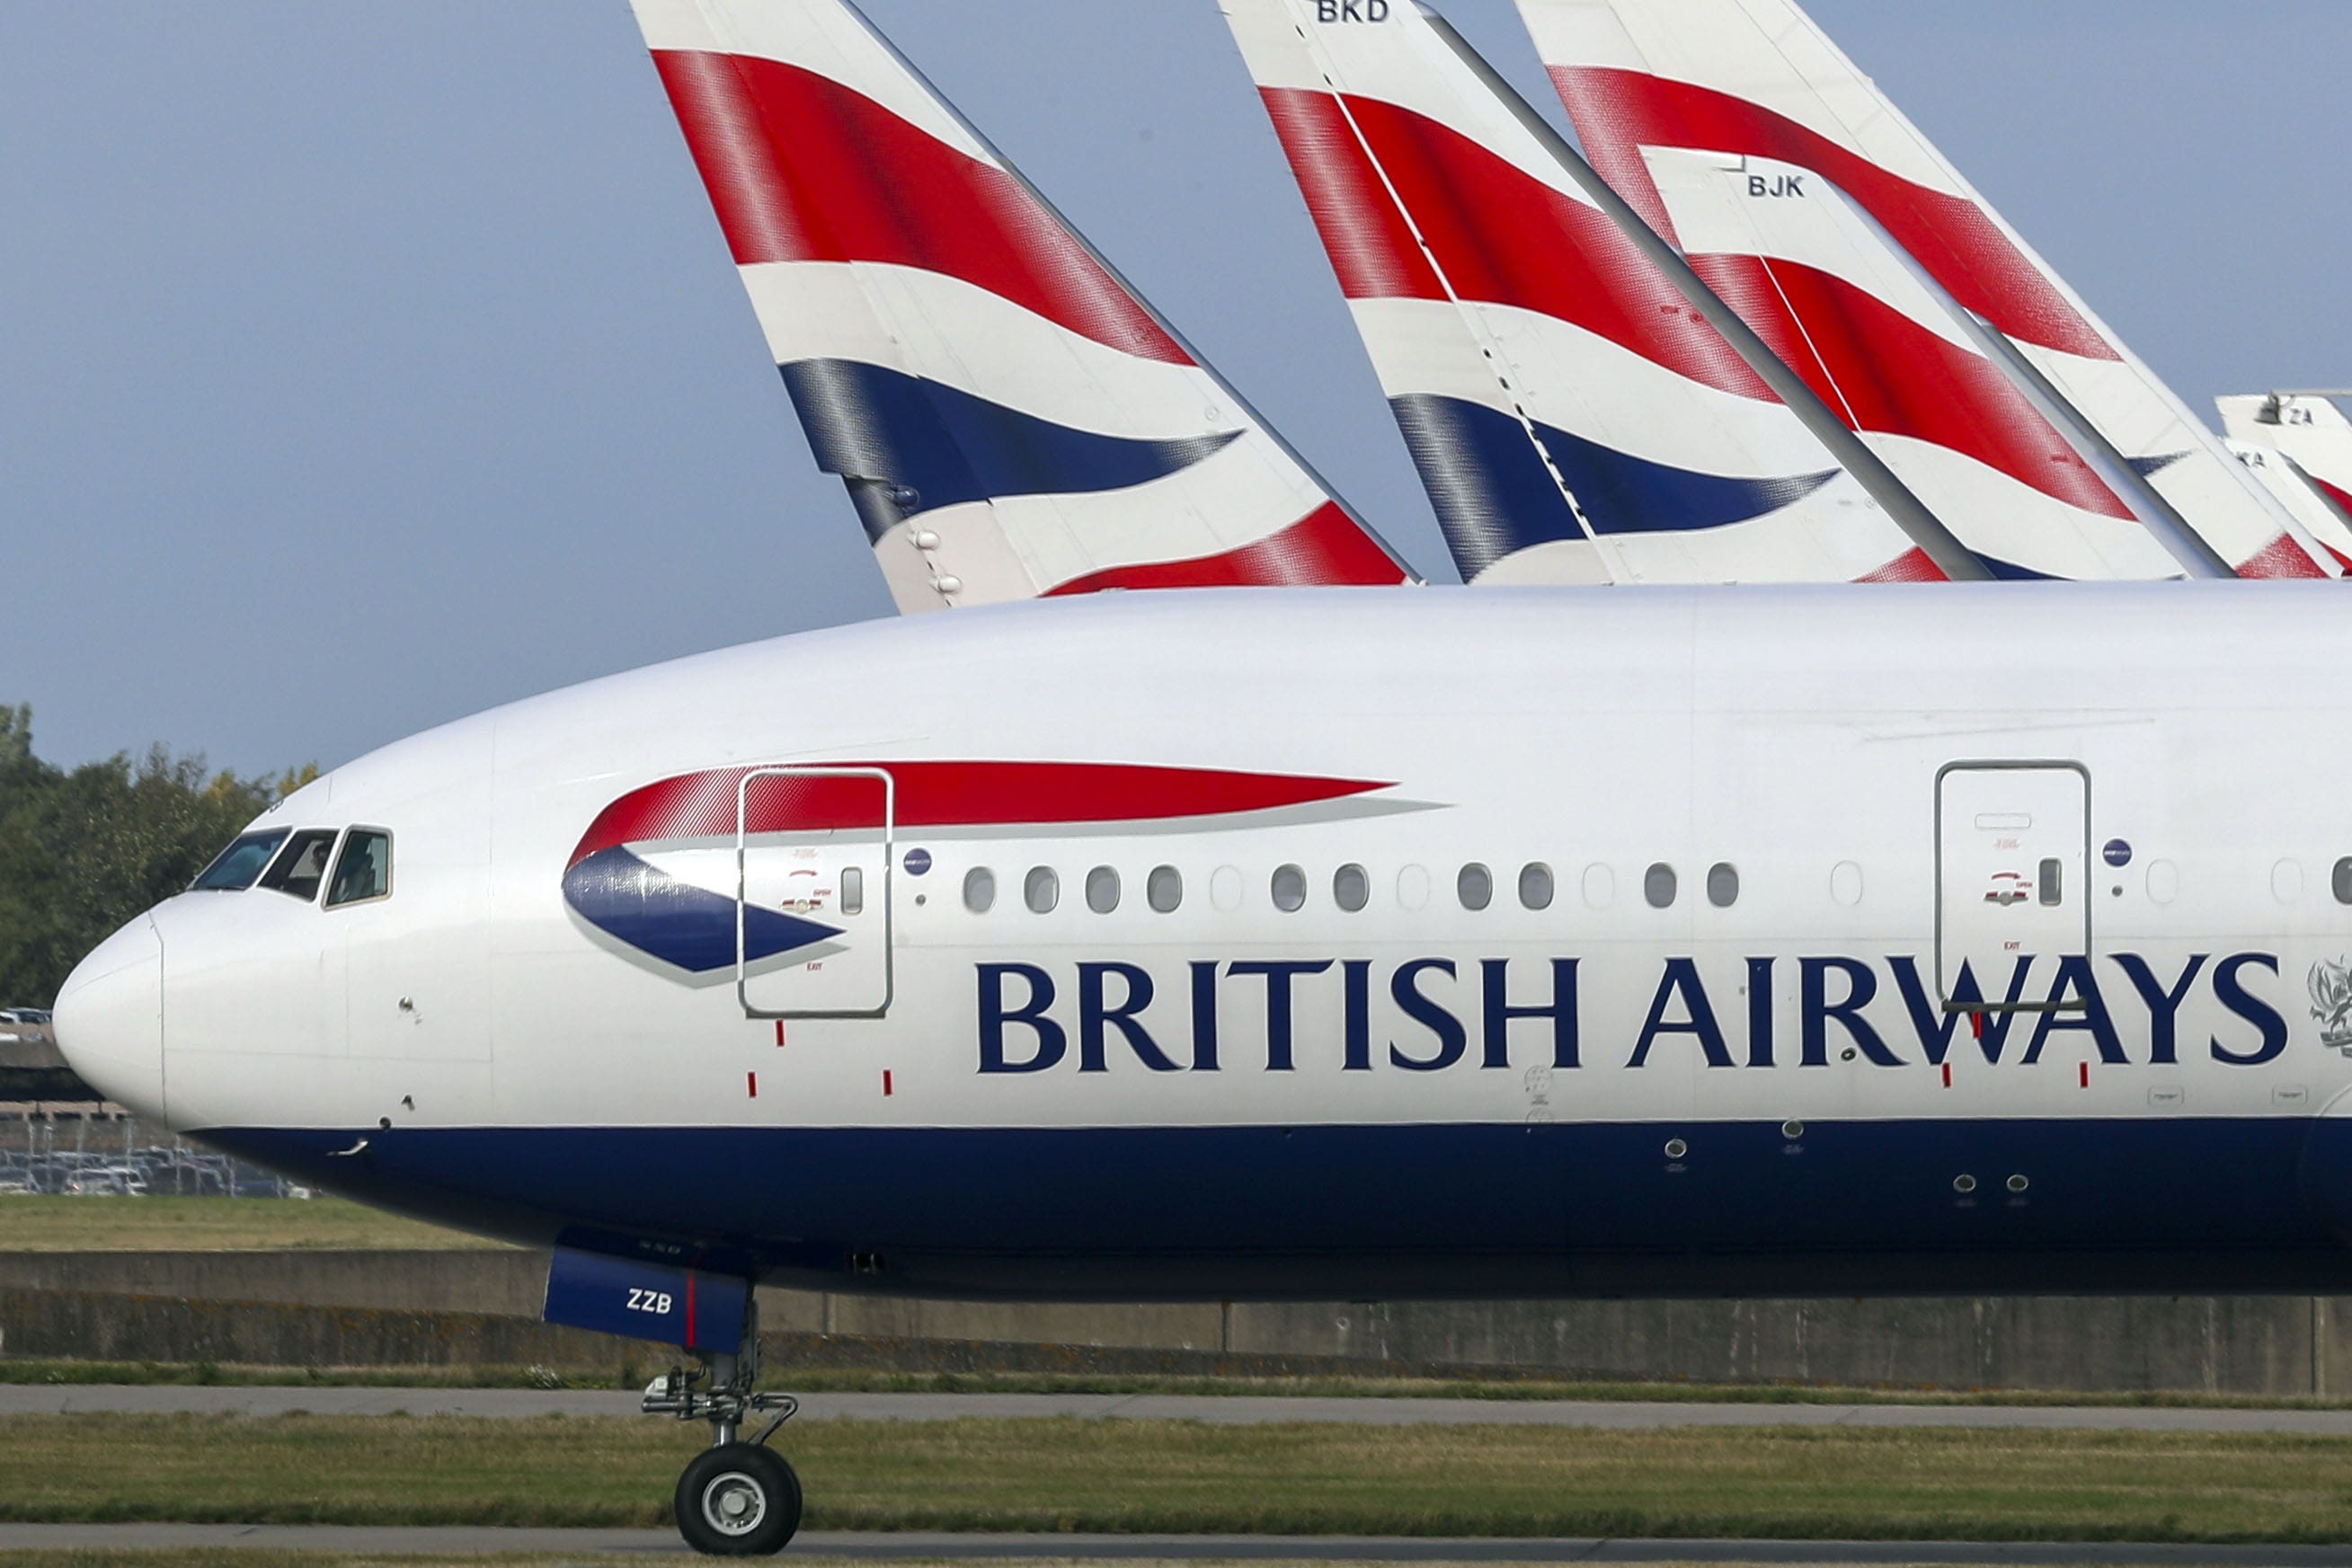 IAG owns British Airways, Iberia, Vueling and Aer Lingus